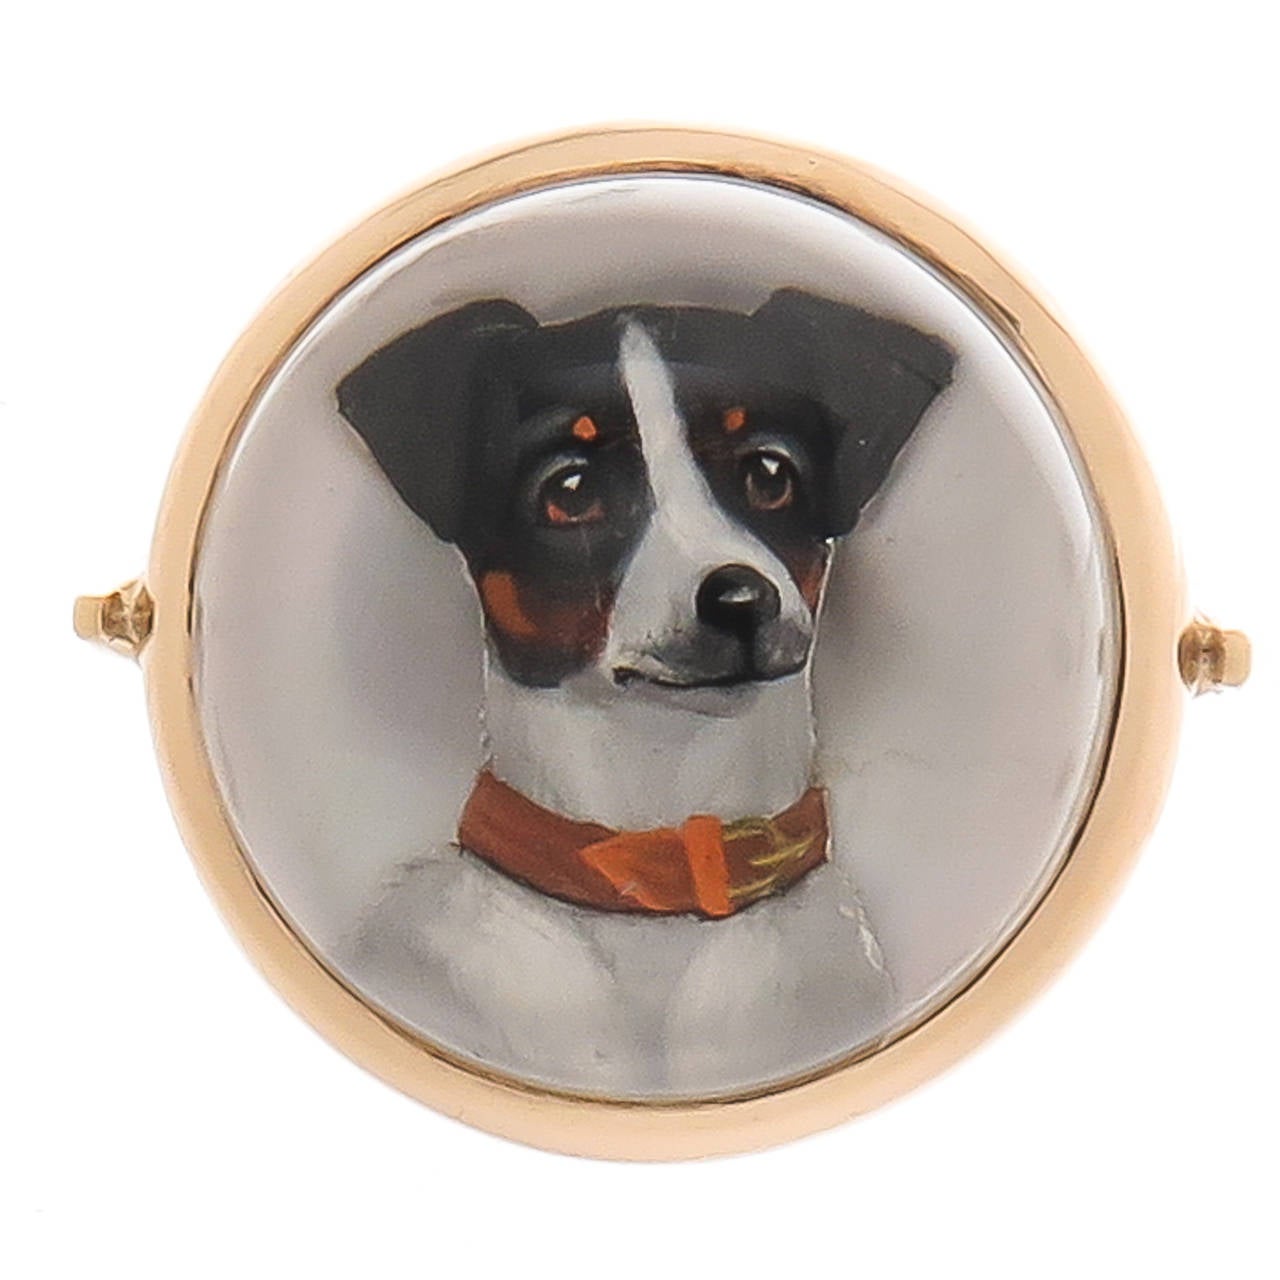 Circa 1930s 14K yellow Gold Ring with a very fine Reverse painted crystal of a Fox Terrier, Mother of pearl backed. Great quality with great dimension, top measures 5/8 inch in diameter. Finger size = 7